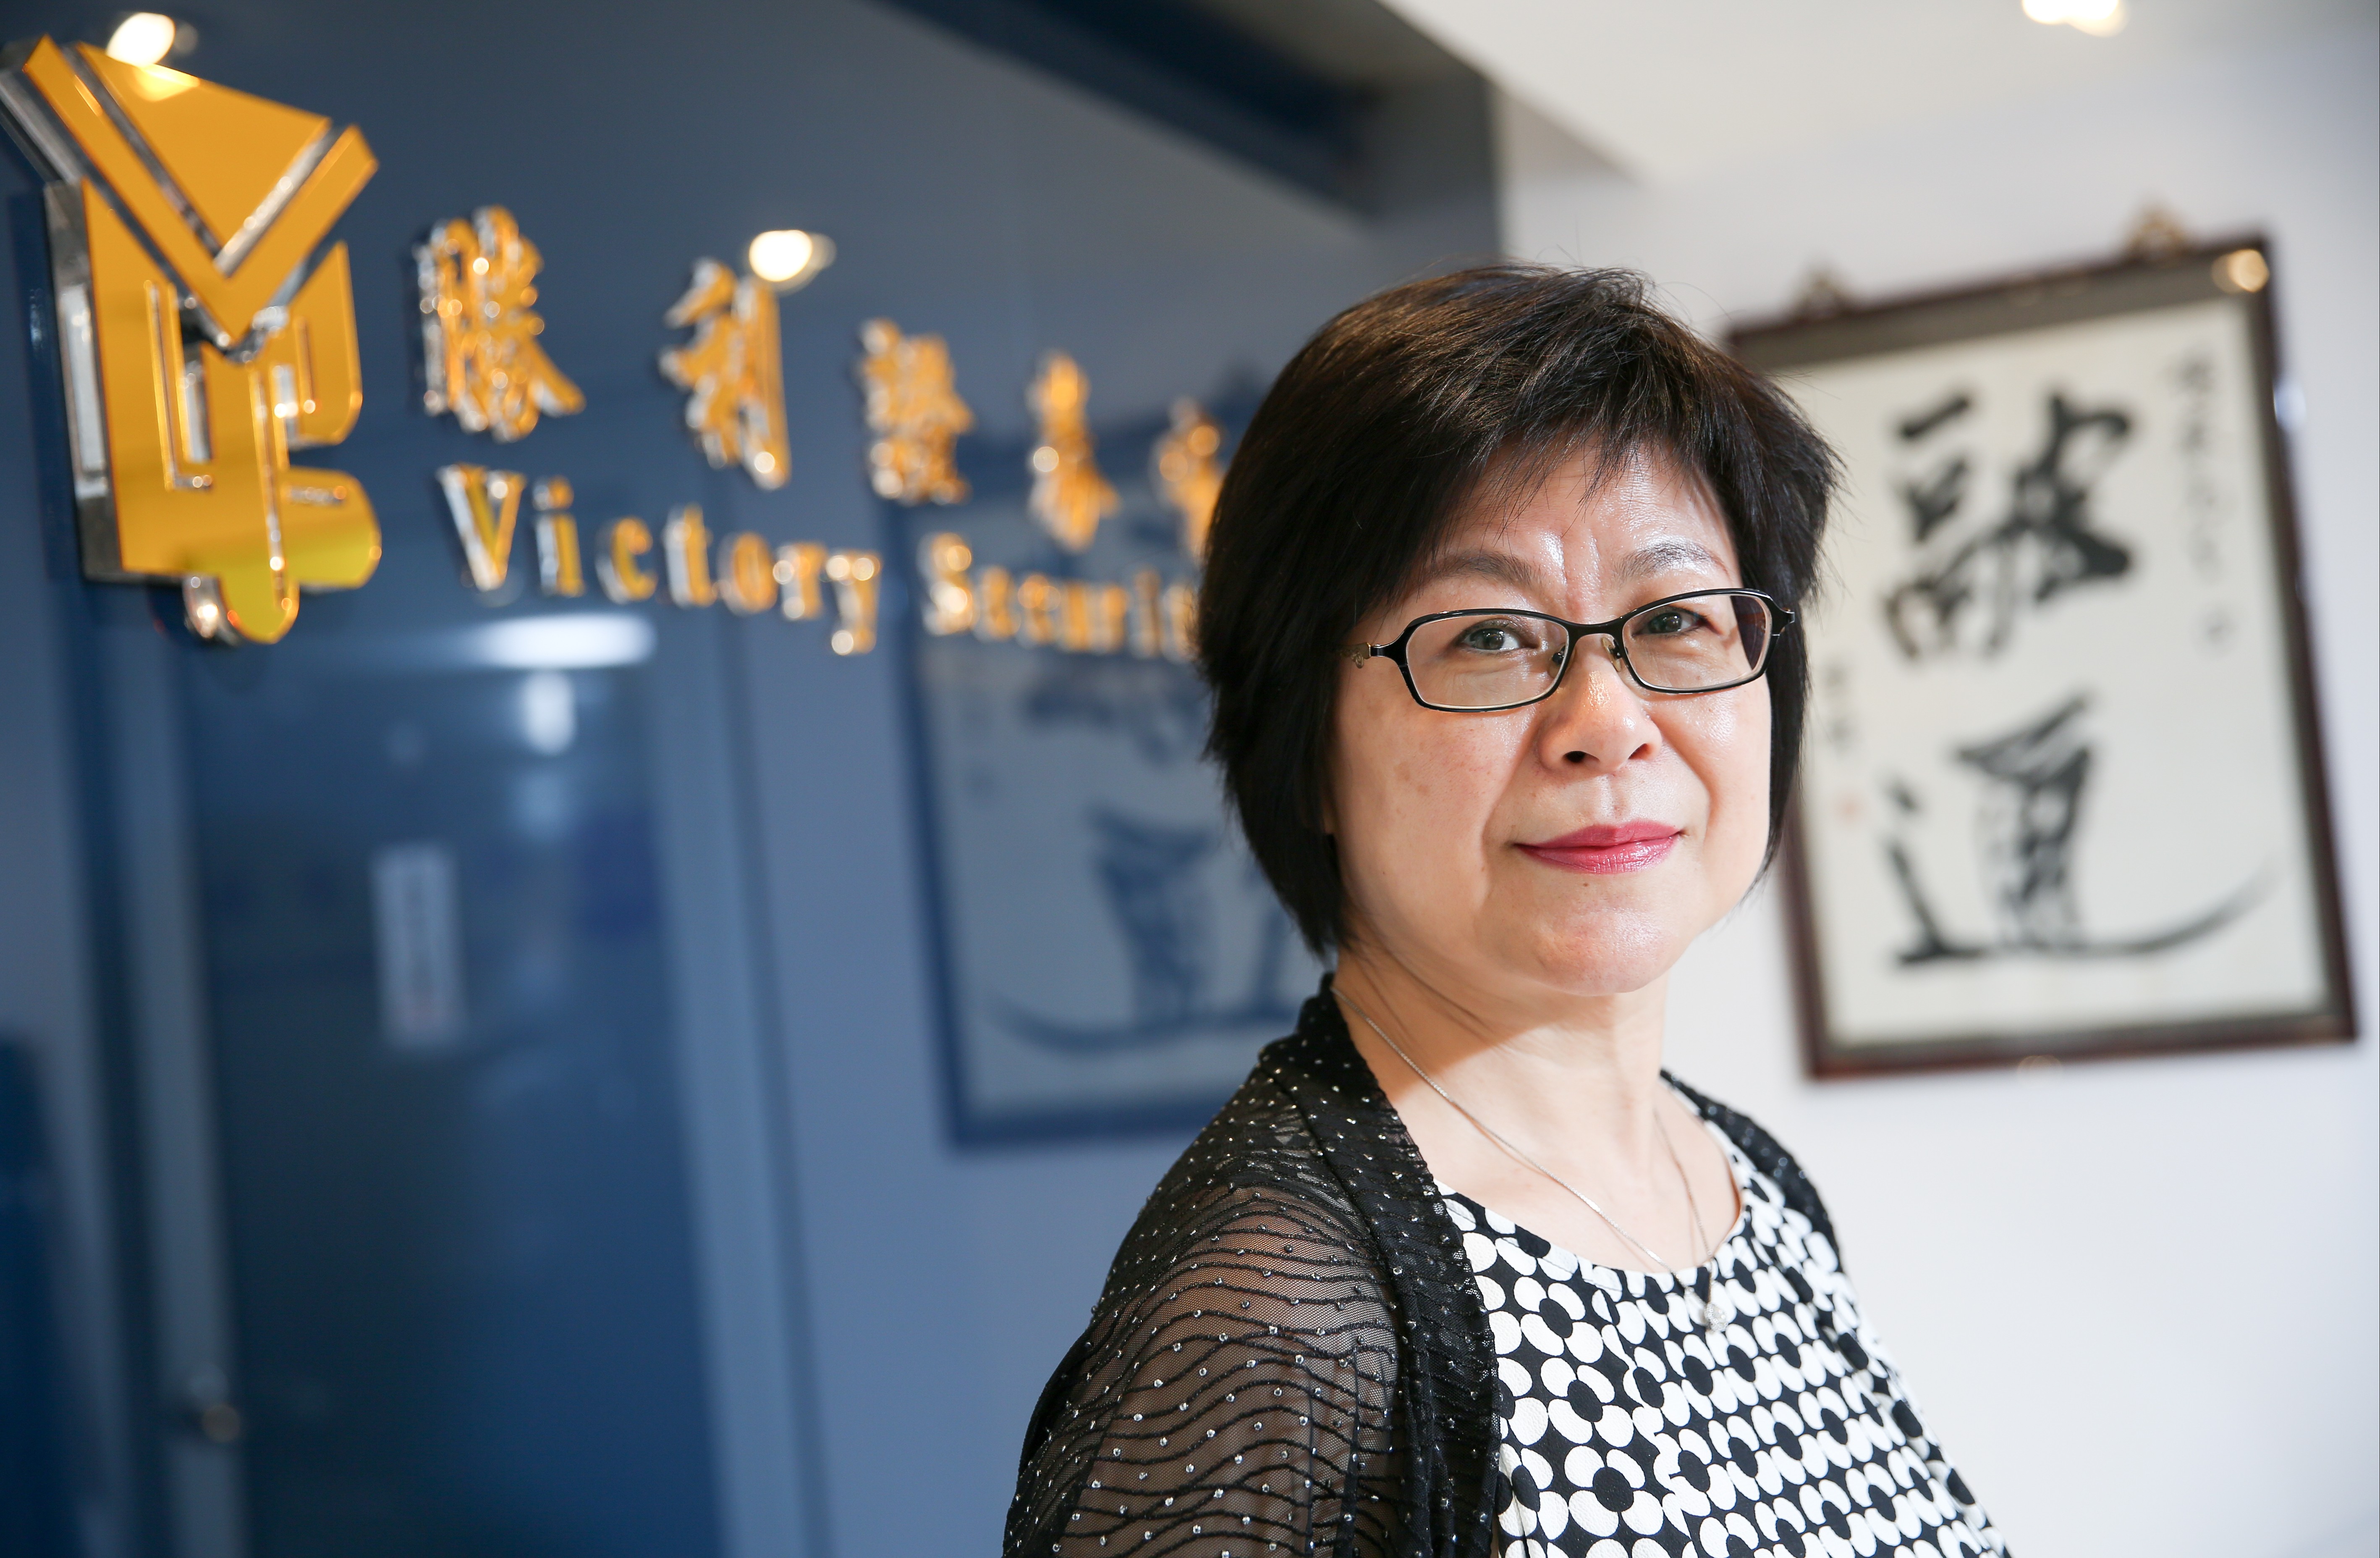 Katerine Kou Kuen, managing director of Victory Financial Group, a mid-sized Hong Kong brokerage which she took over from her father who cofounded it 46 years ago. Photo: Sam Tsang